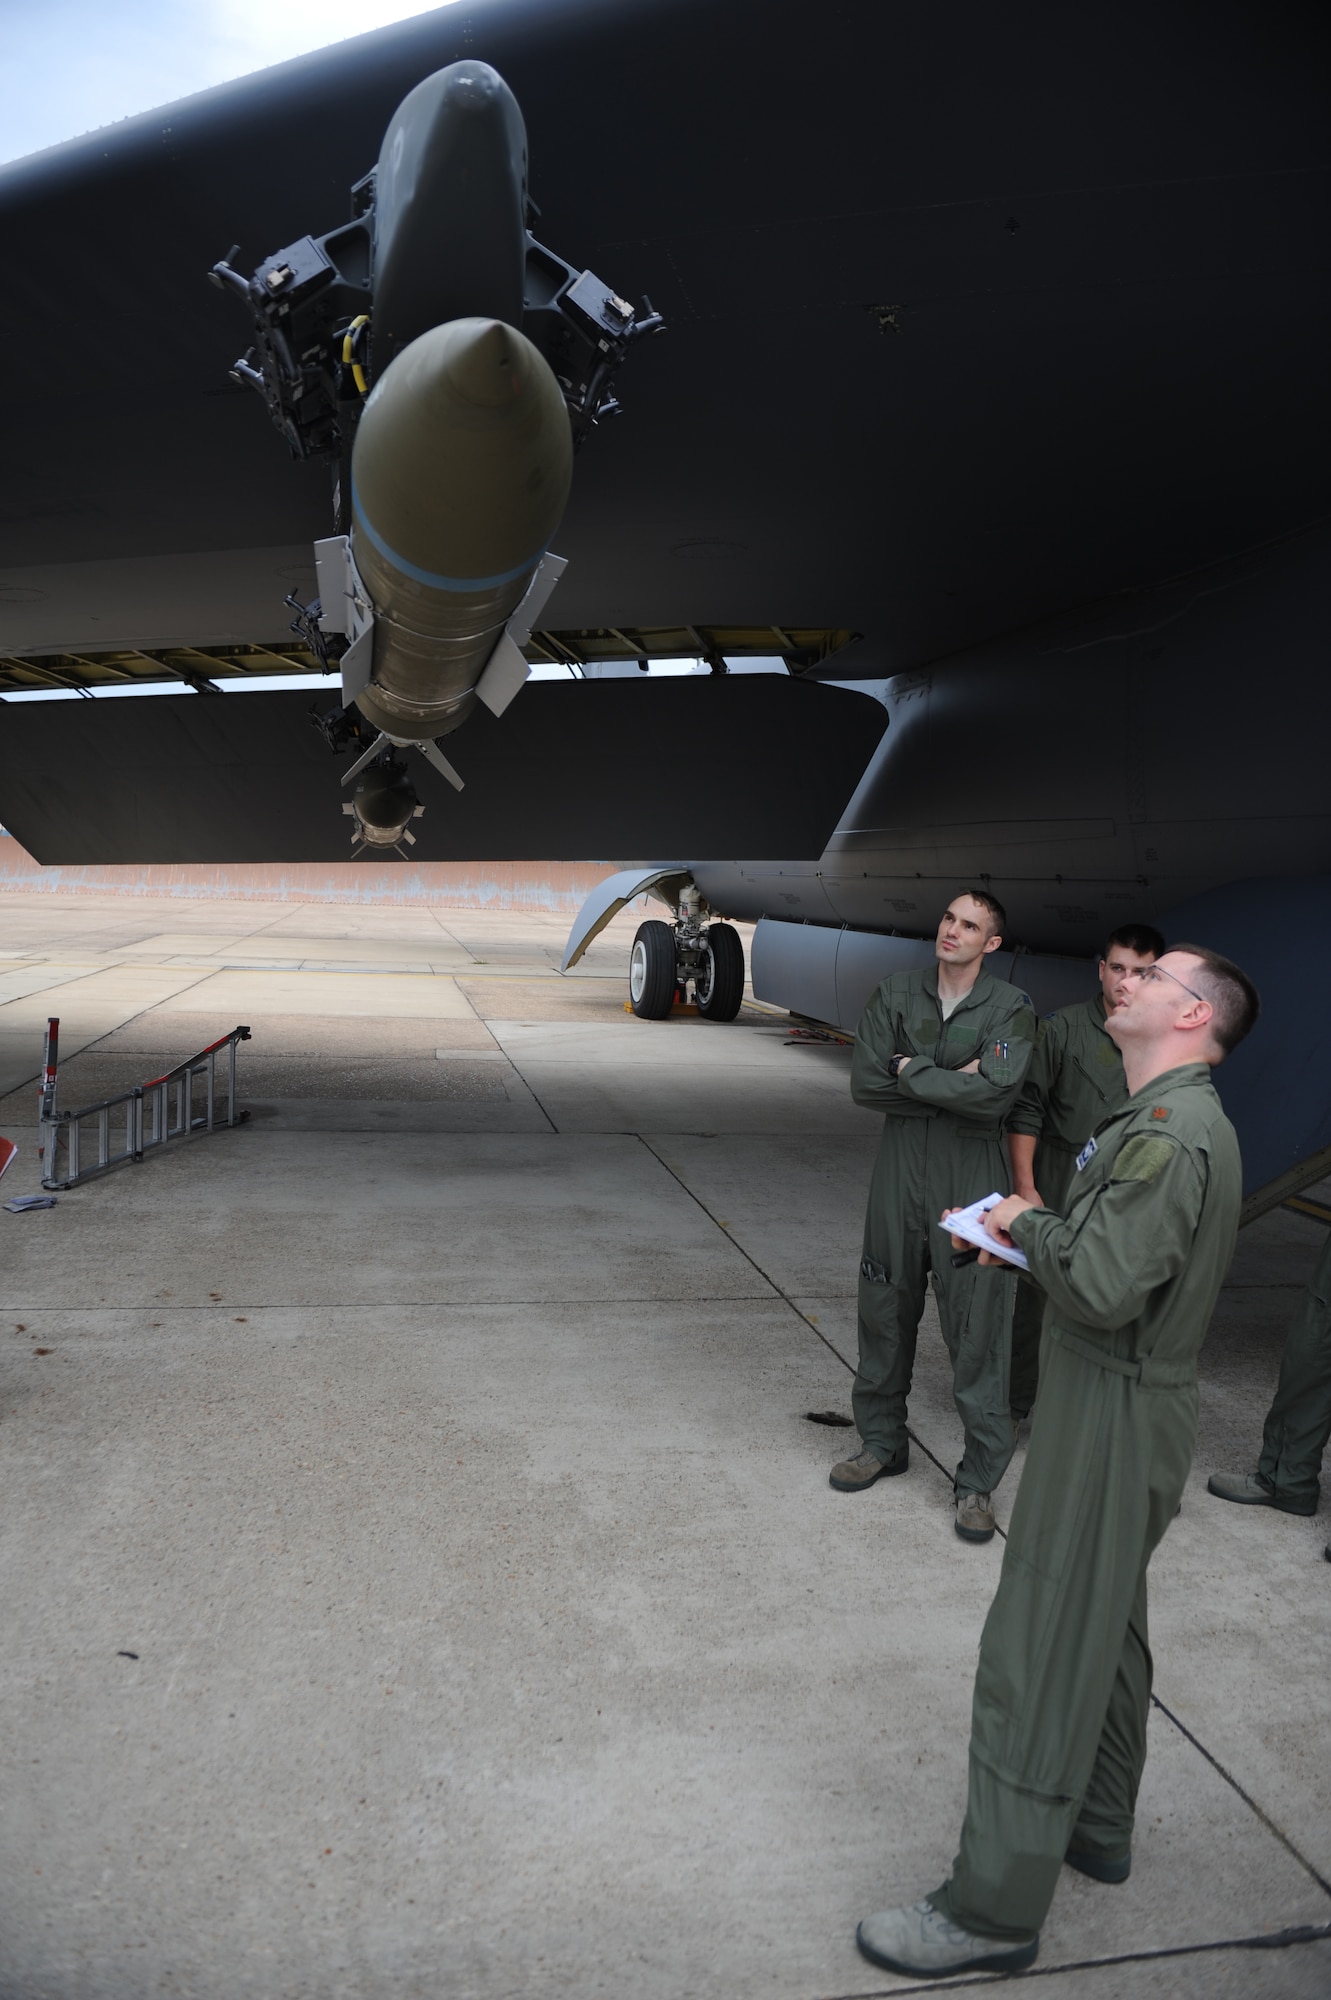 Maj. Brett Plumber, 20th Bomb Squadron radar navigator, shows aircrew members how to properly inspect munitions on Barksdale Air Force Base, La., Aug. 15. Prior to a flight, aircrews check munitions for damage and leaks and ensure the bomb is properly mounted to the aircraft. The aircrew flew to Utah to participate in Exercise Combat Hammer.  Combat Hammer evaluates the employment of precision guided munitions to ensure the weapons are fully functional and mission capable. (U.S. Air Force photo/Airman 1st Class Micaiah Anthony)(RELEASED)